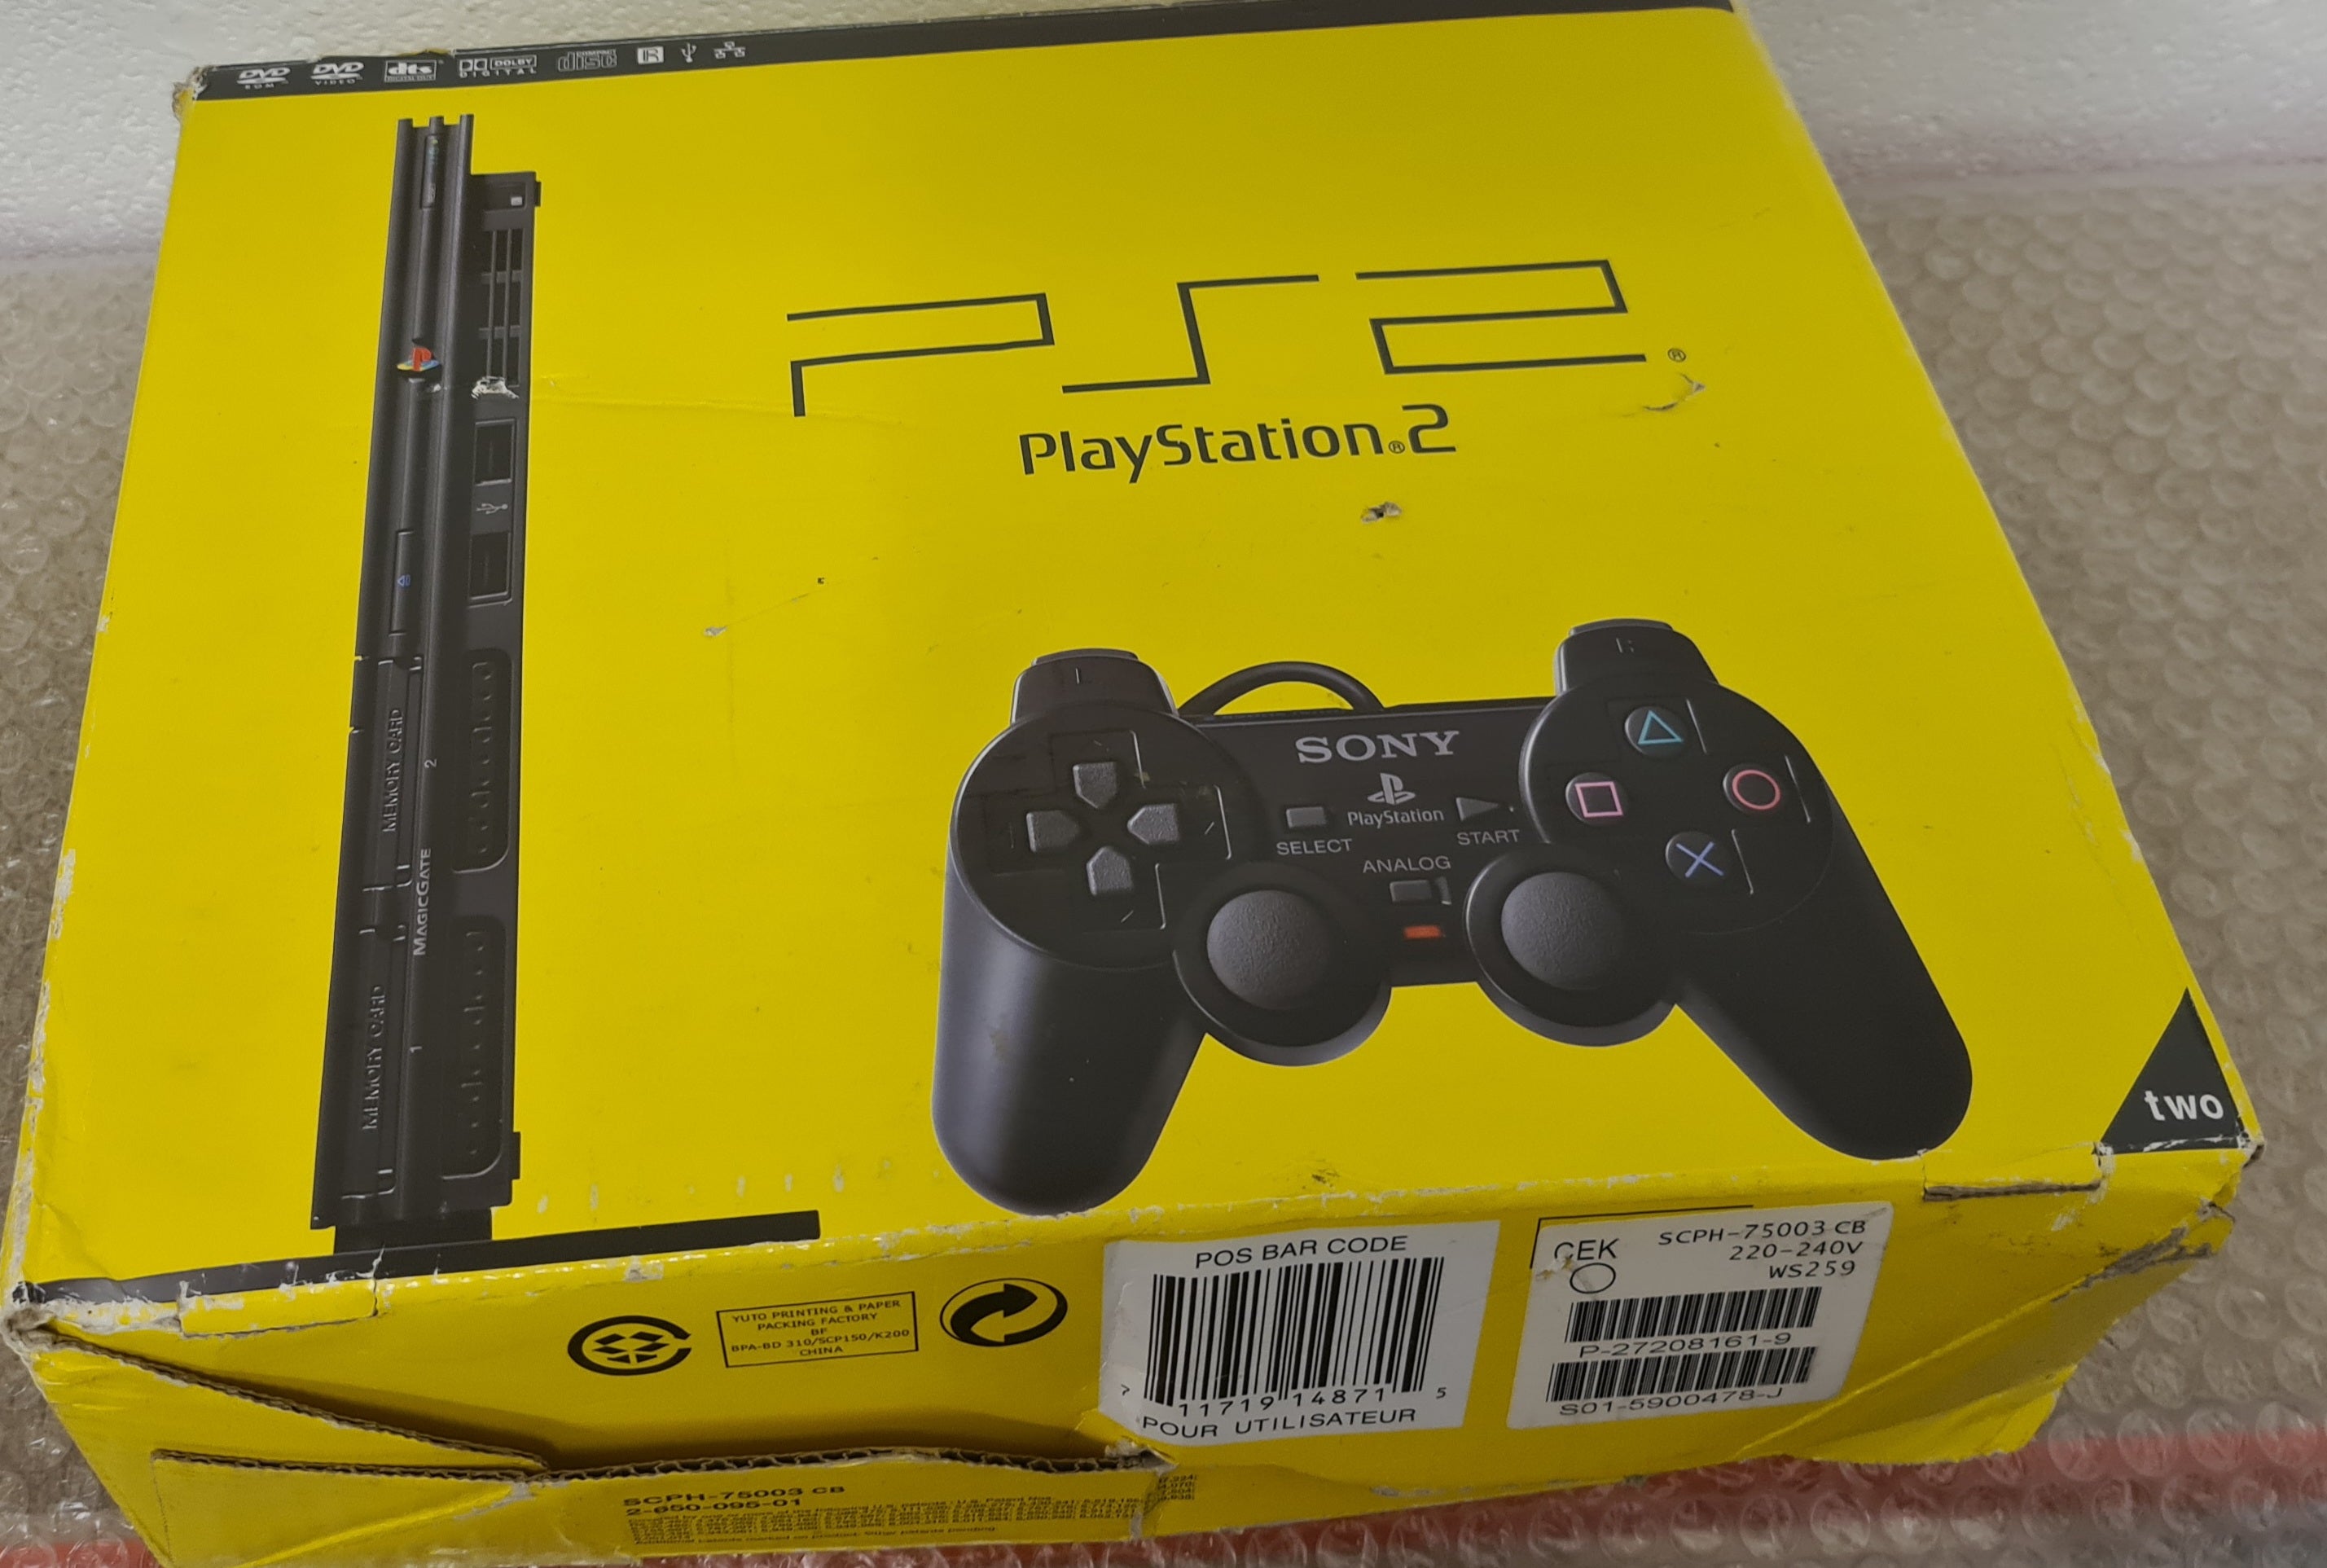 Boxed Sony Playstation 2 (PS2) Slim Console SCPH 75003 with 